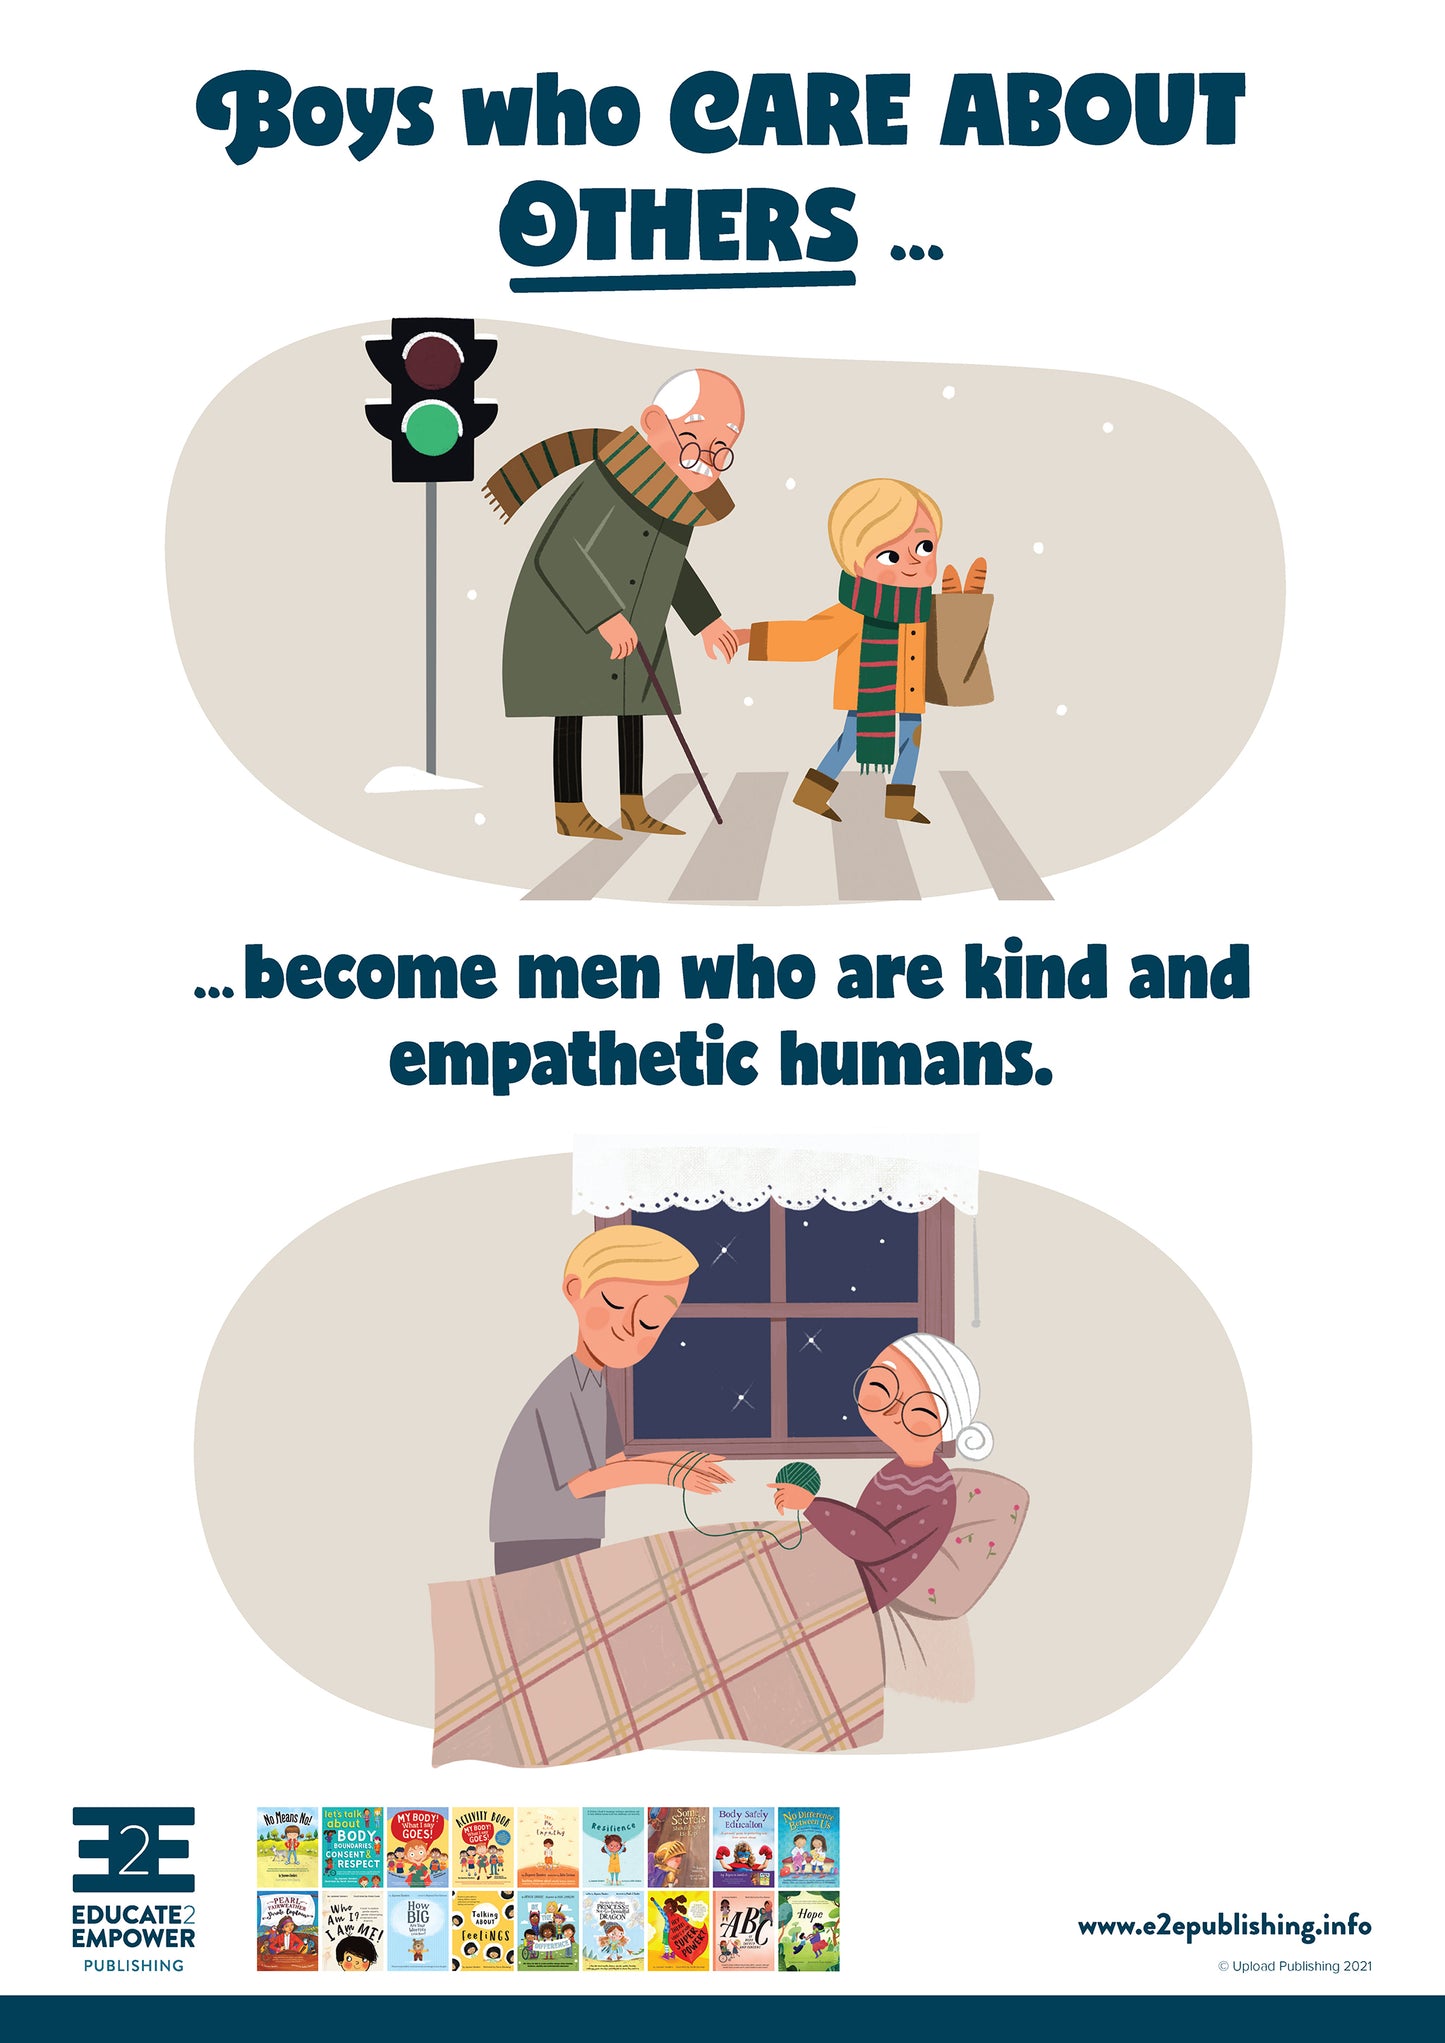 A poster for children titled 'Boys who care about opthers... become men who are kind and empathetic humans.' This is accompanied by a cartoon image of a young boy helping an old man across the road. Below this the same boy, as an adult, is helping a bedridden old women with her knitting.